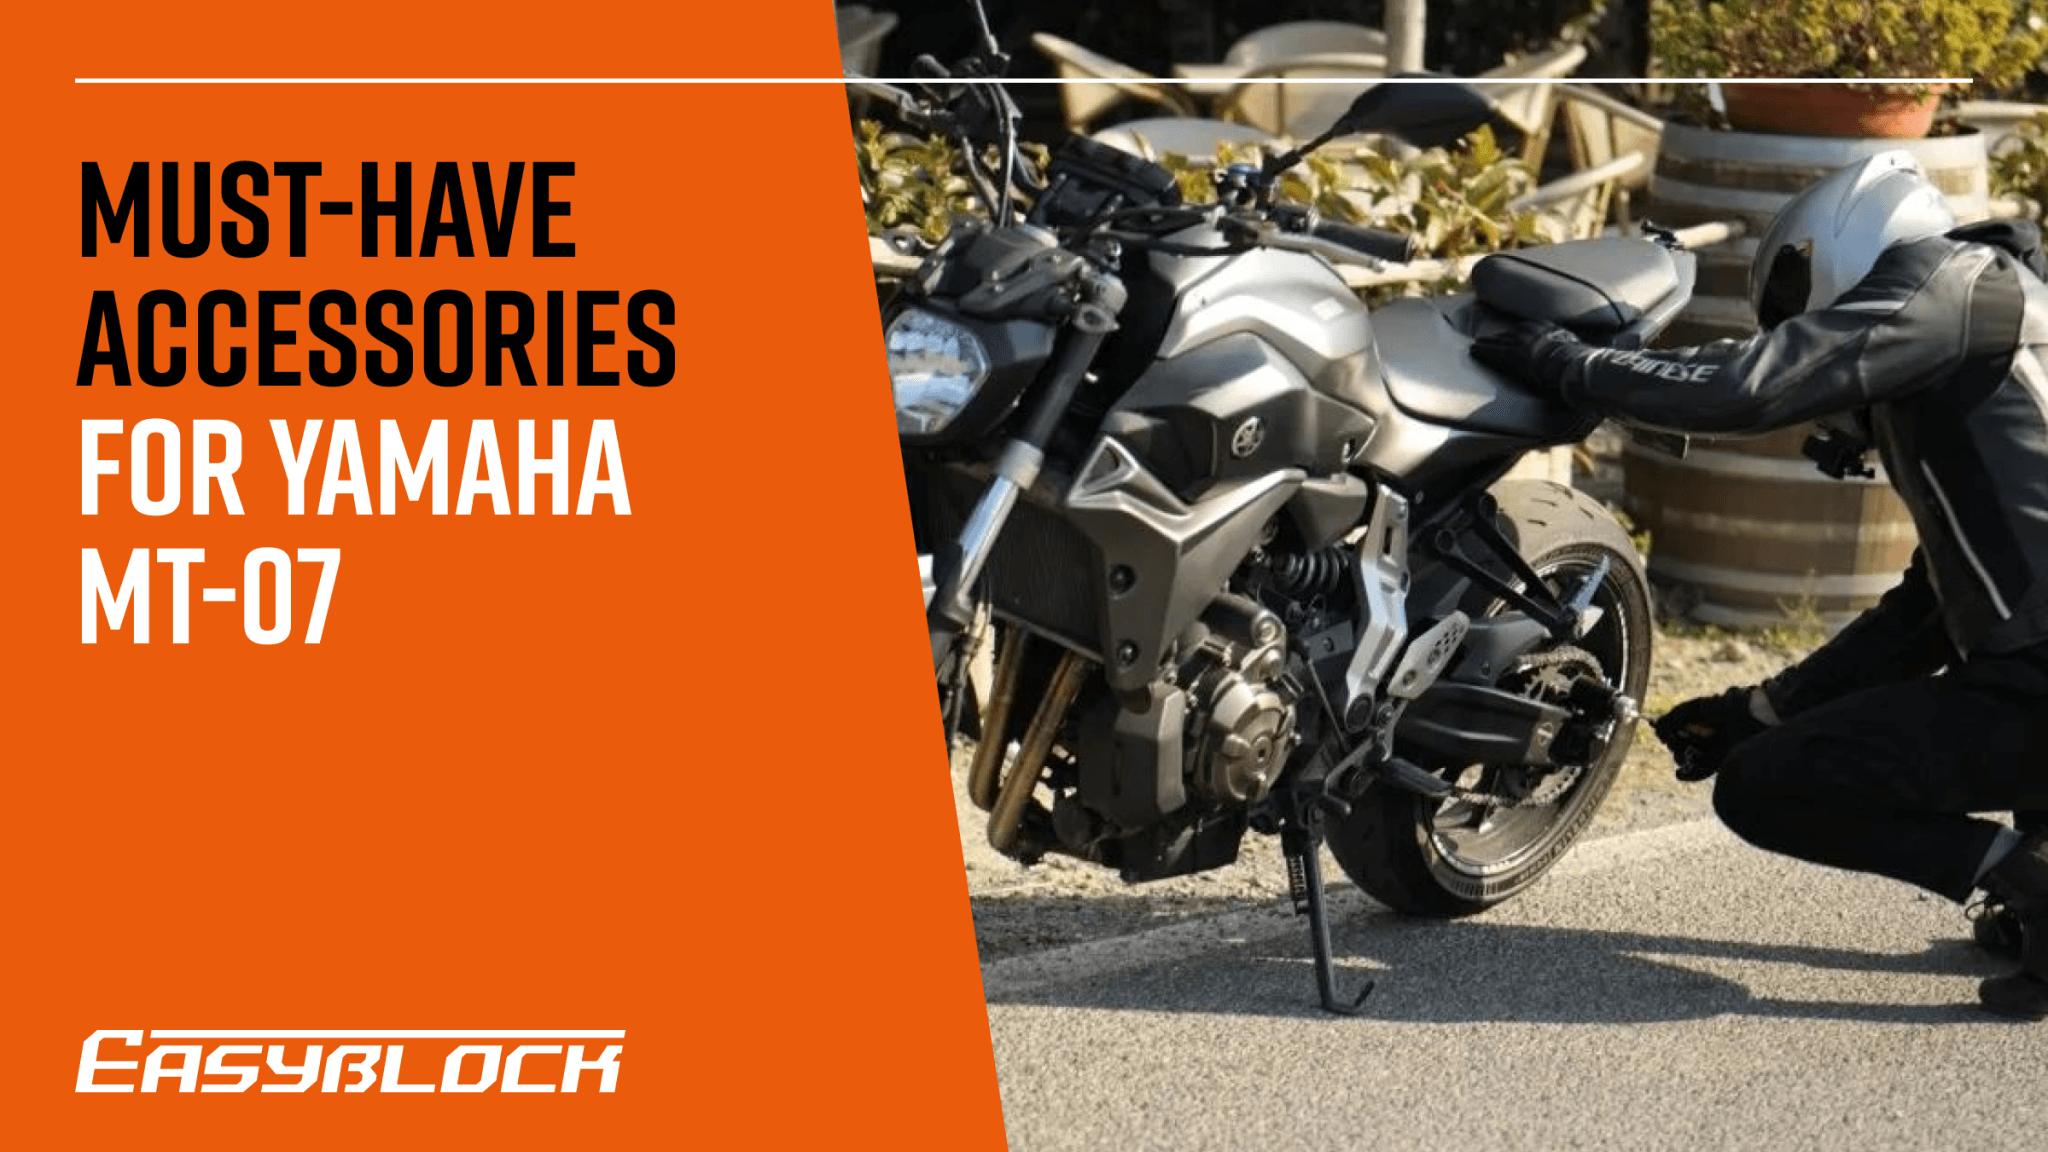 Must-Have Accessories for Yamaha – EasyBlock